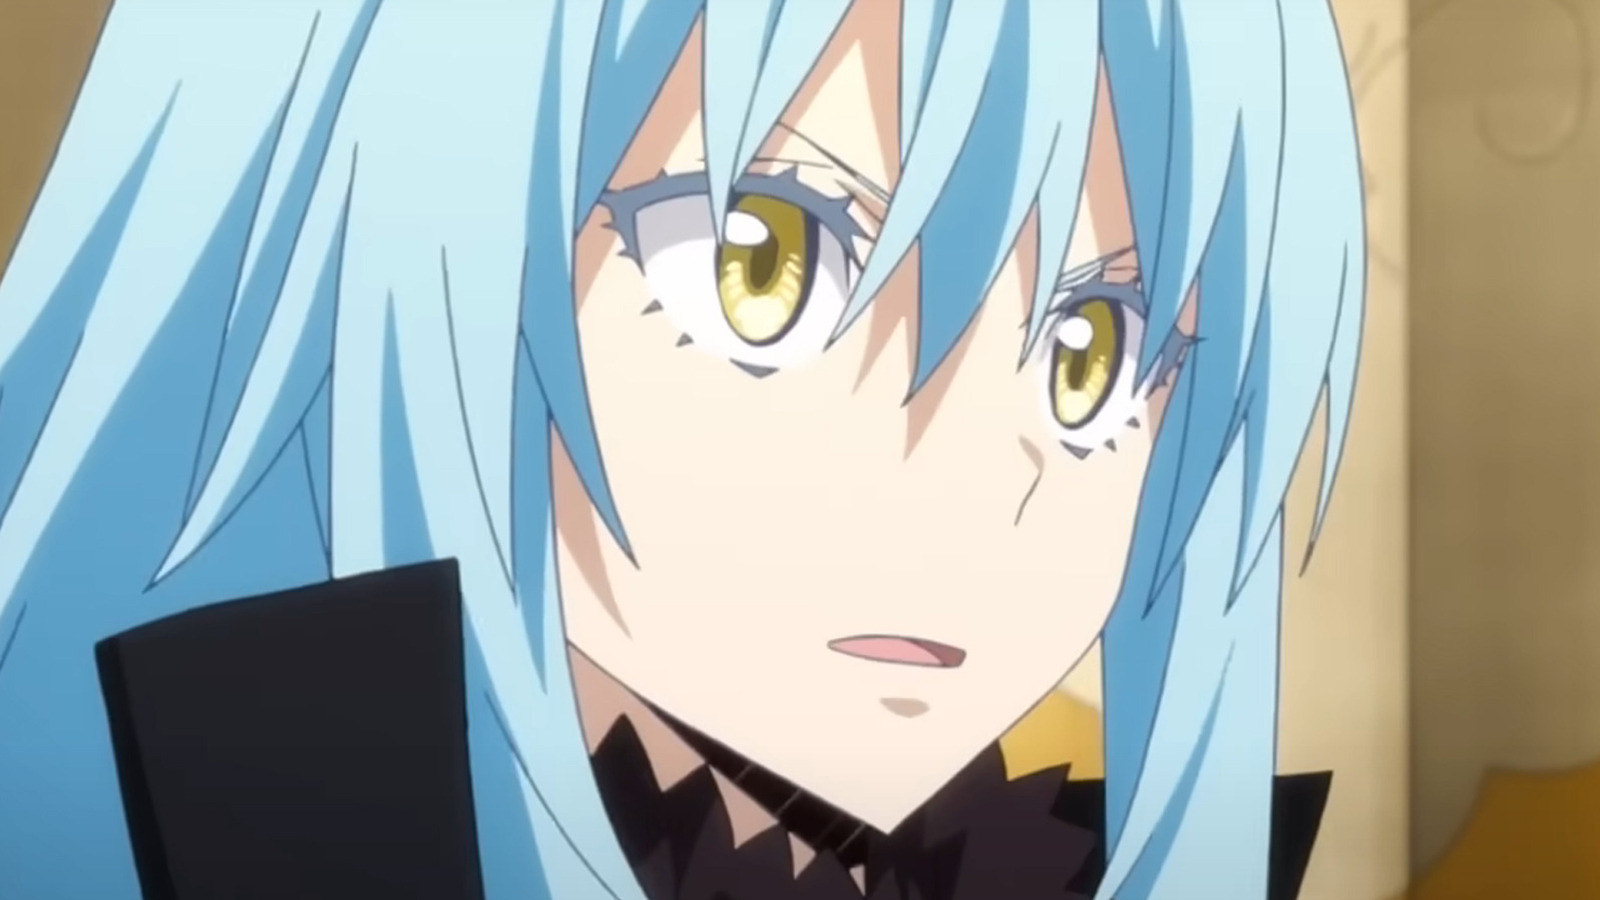 That Time I Got Reincarnated as a Slime' Season 2 - 2nd cour reveals 3rd  visual, 2nd half airs July